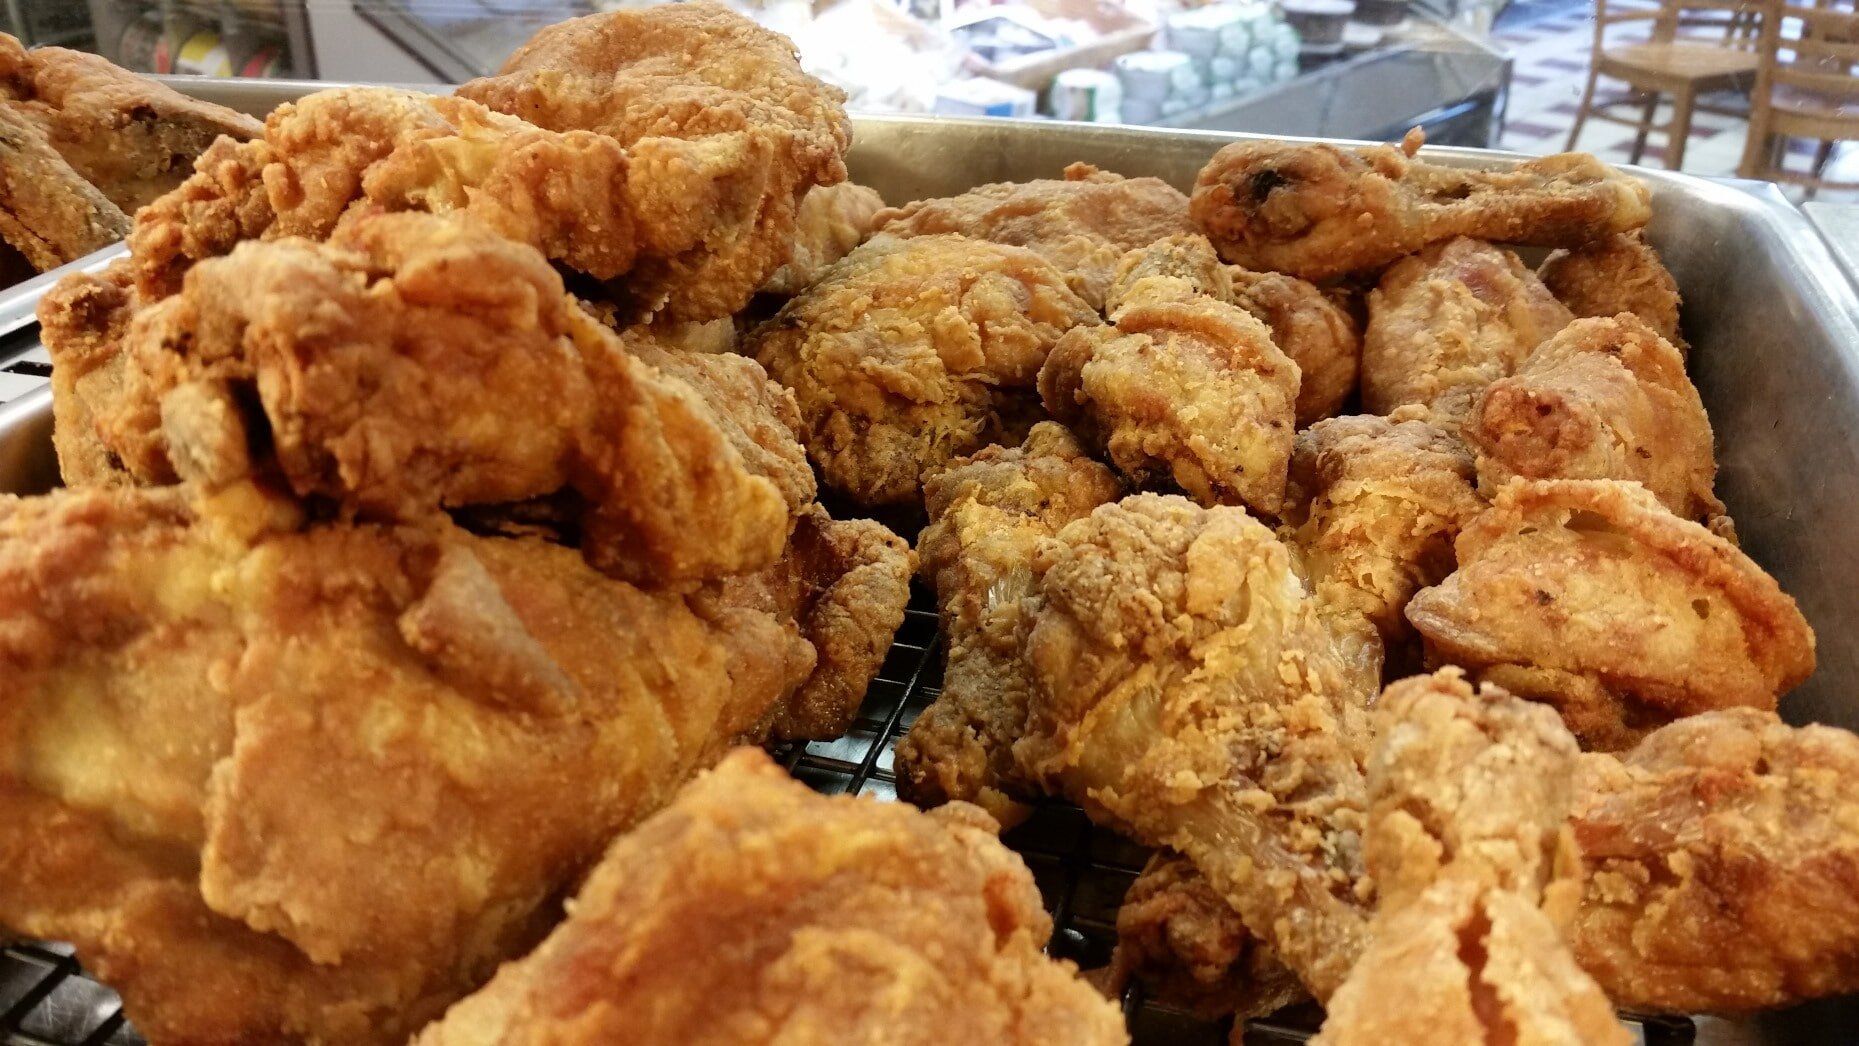 Fried Chicken - Authentic Italian Food in Catonsville, MD